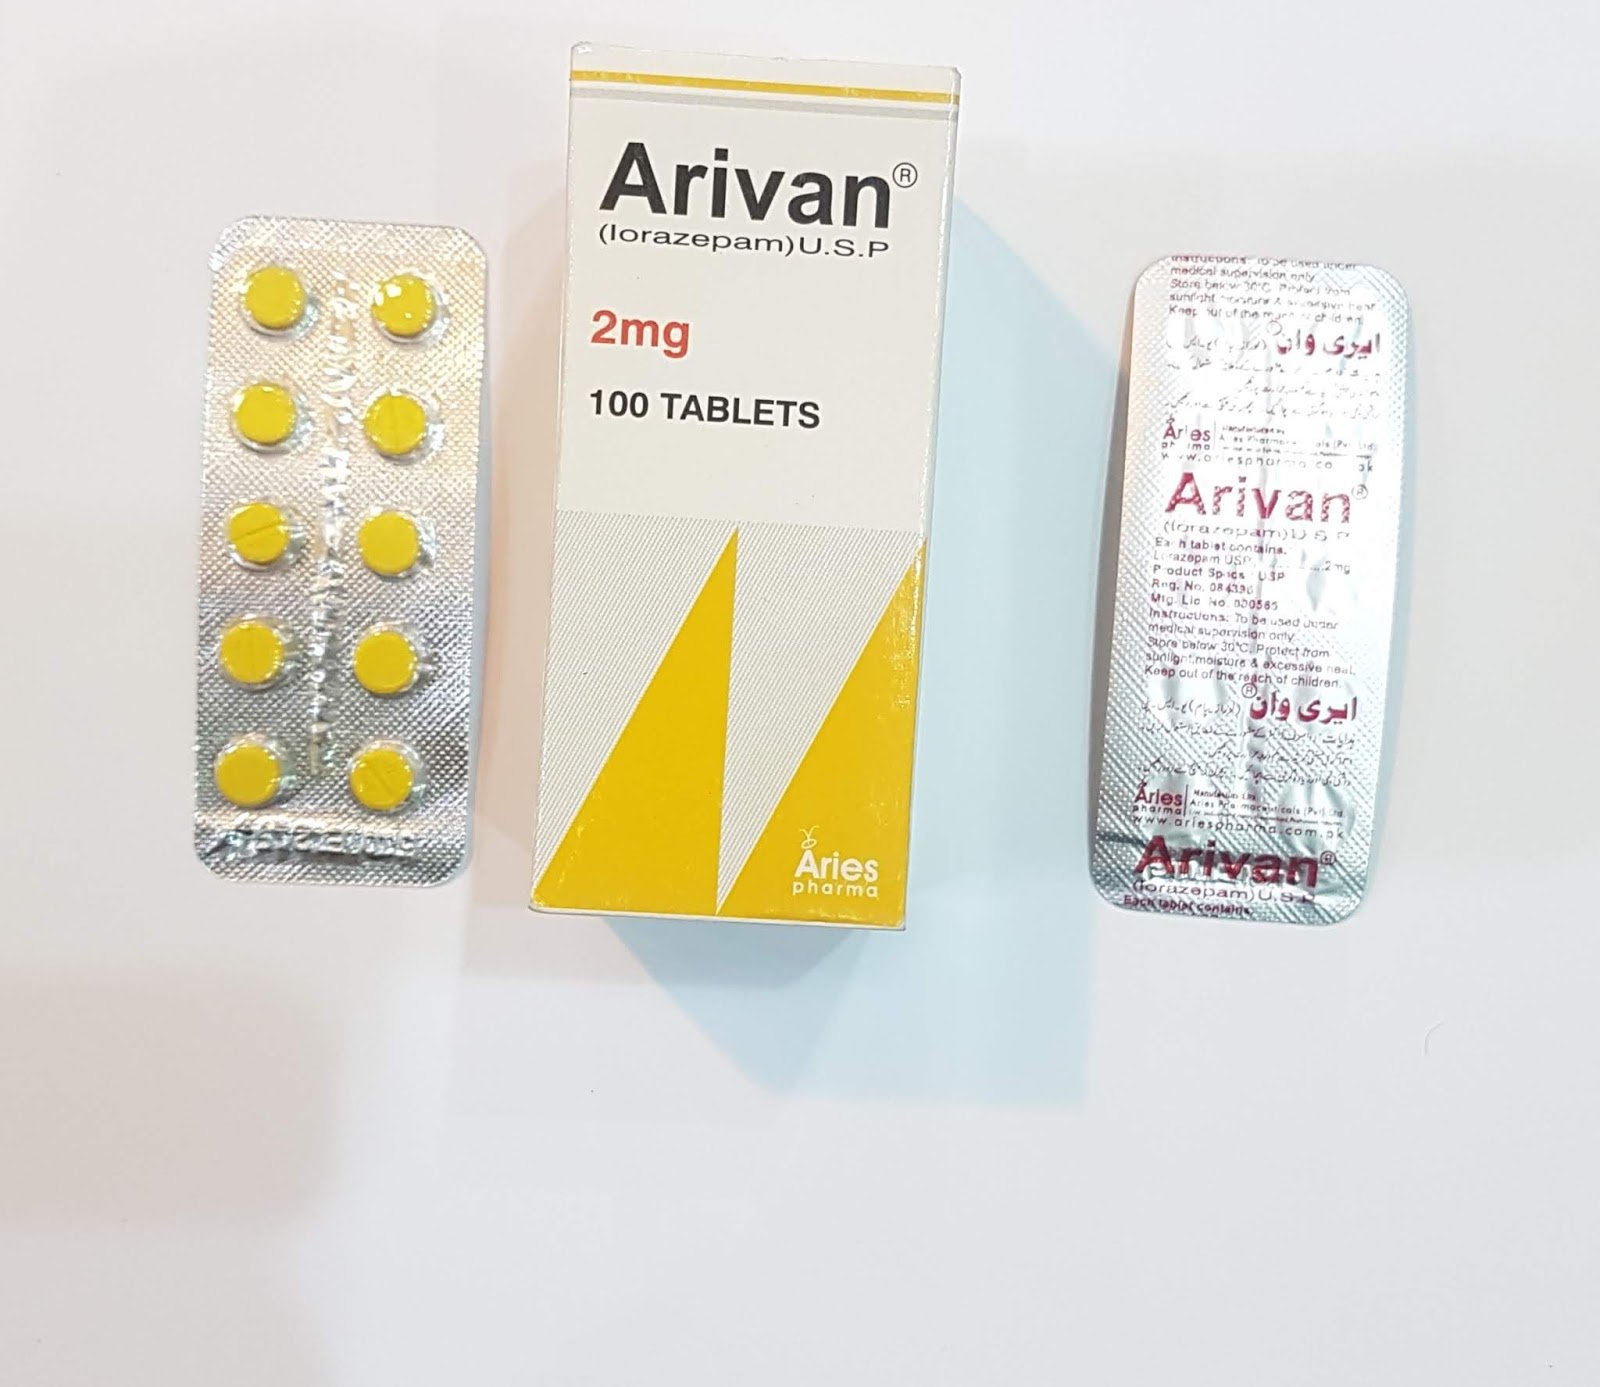 Buy Valium Online: Why to buy generic Ativan Online for Anxiety?